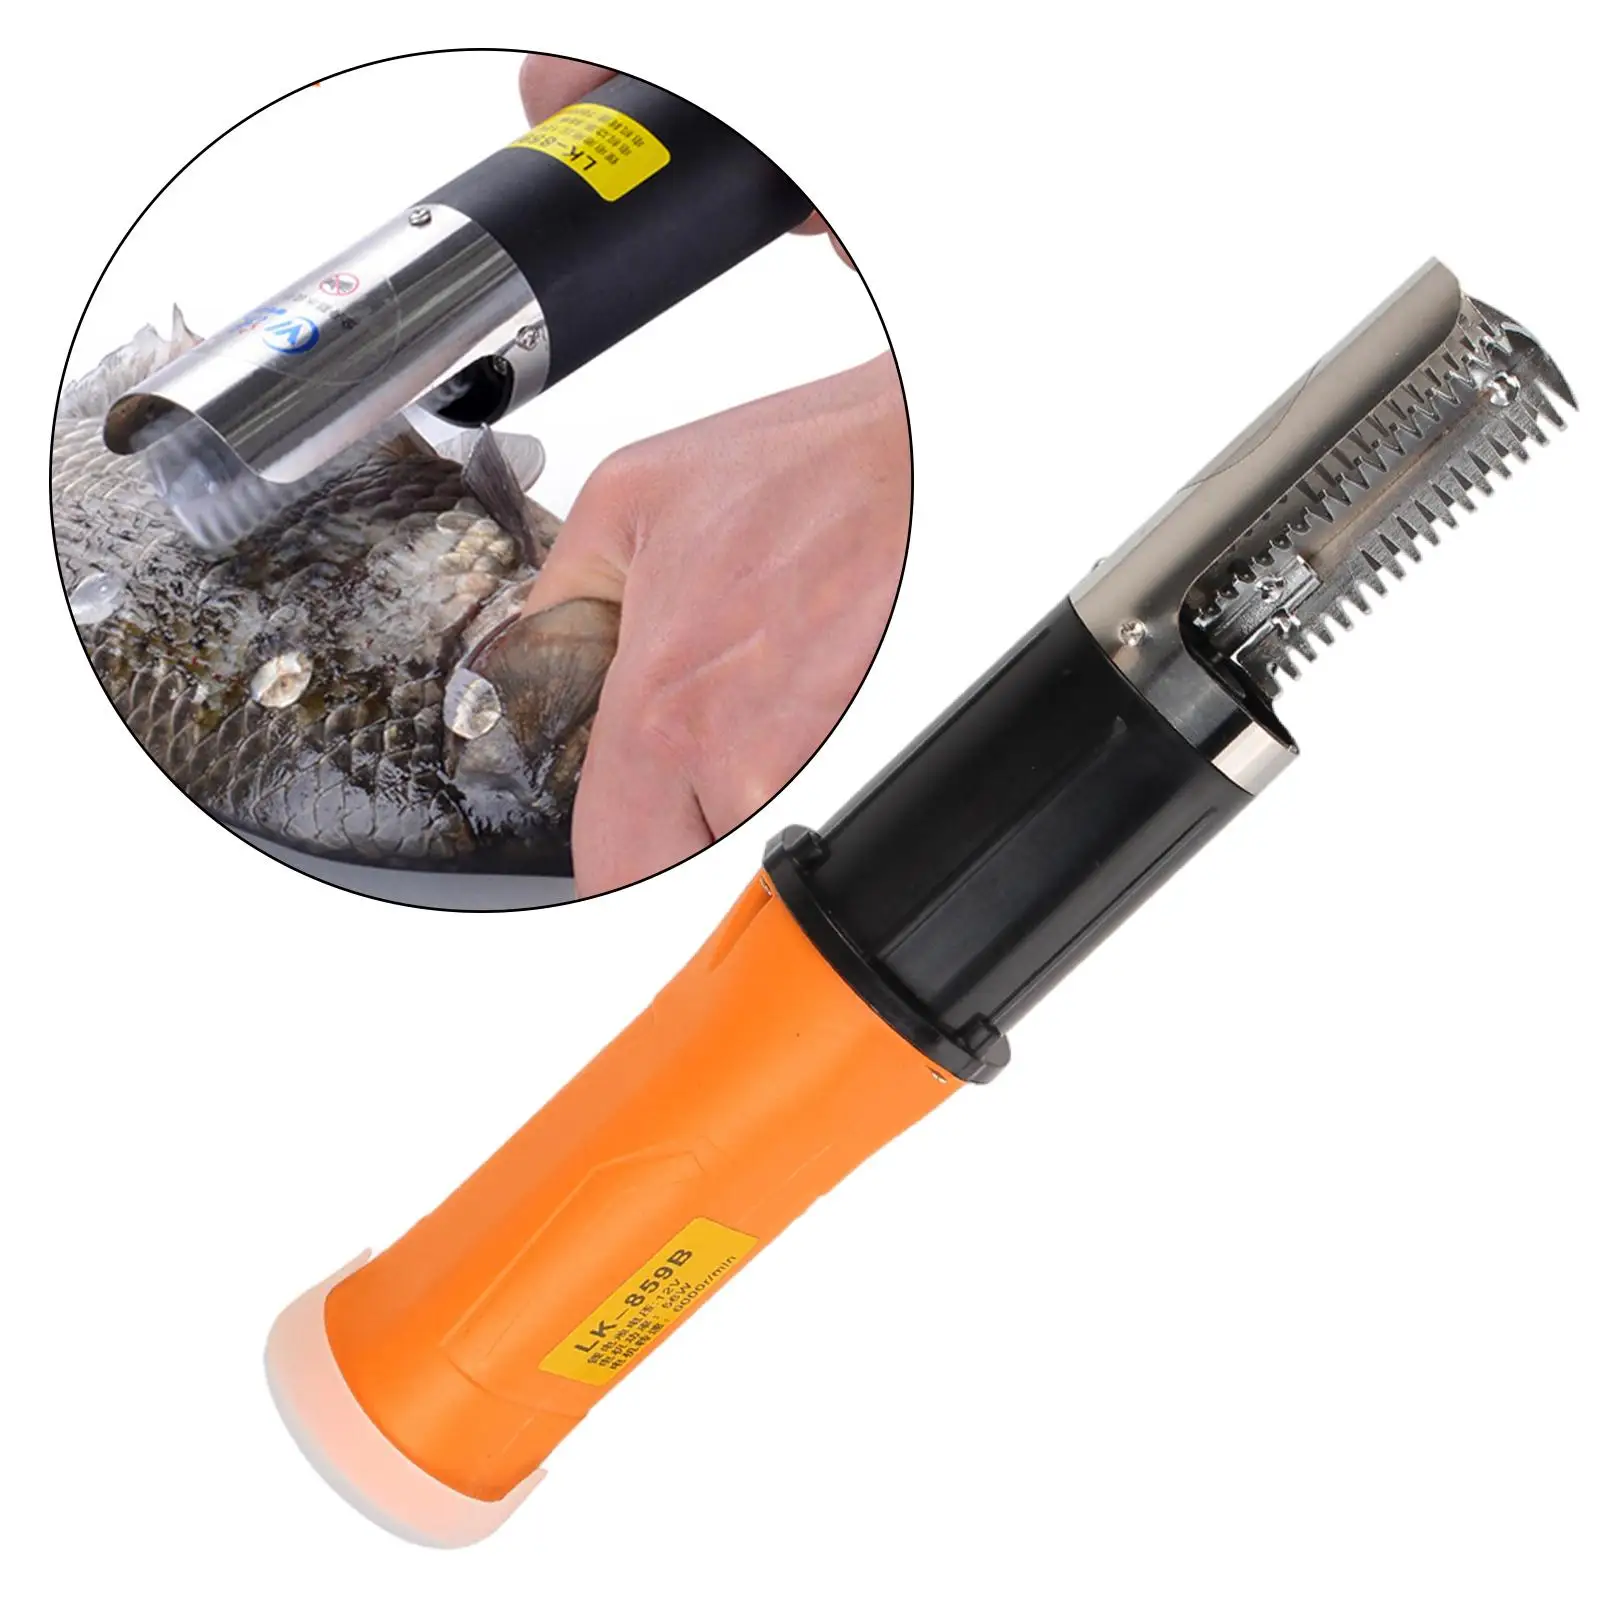 Electric Fish Scaler Cleaner Descaler Scraper Seafood Cleaning Tool Automatic Fish Skin Clean Fish Scaler Remover for Hotel Home